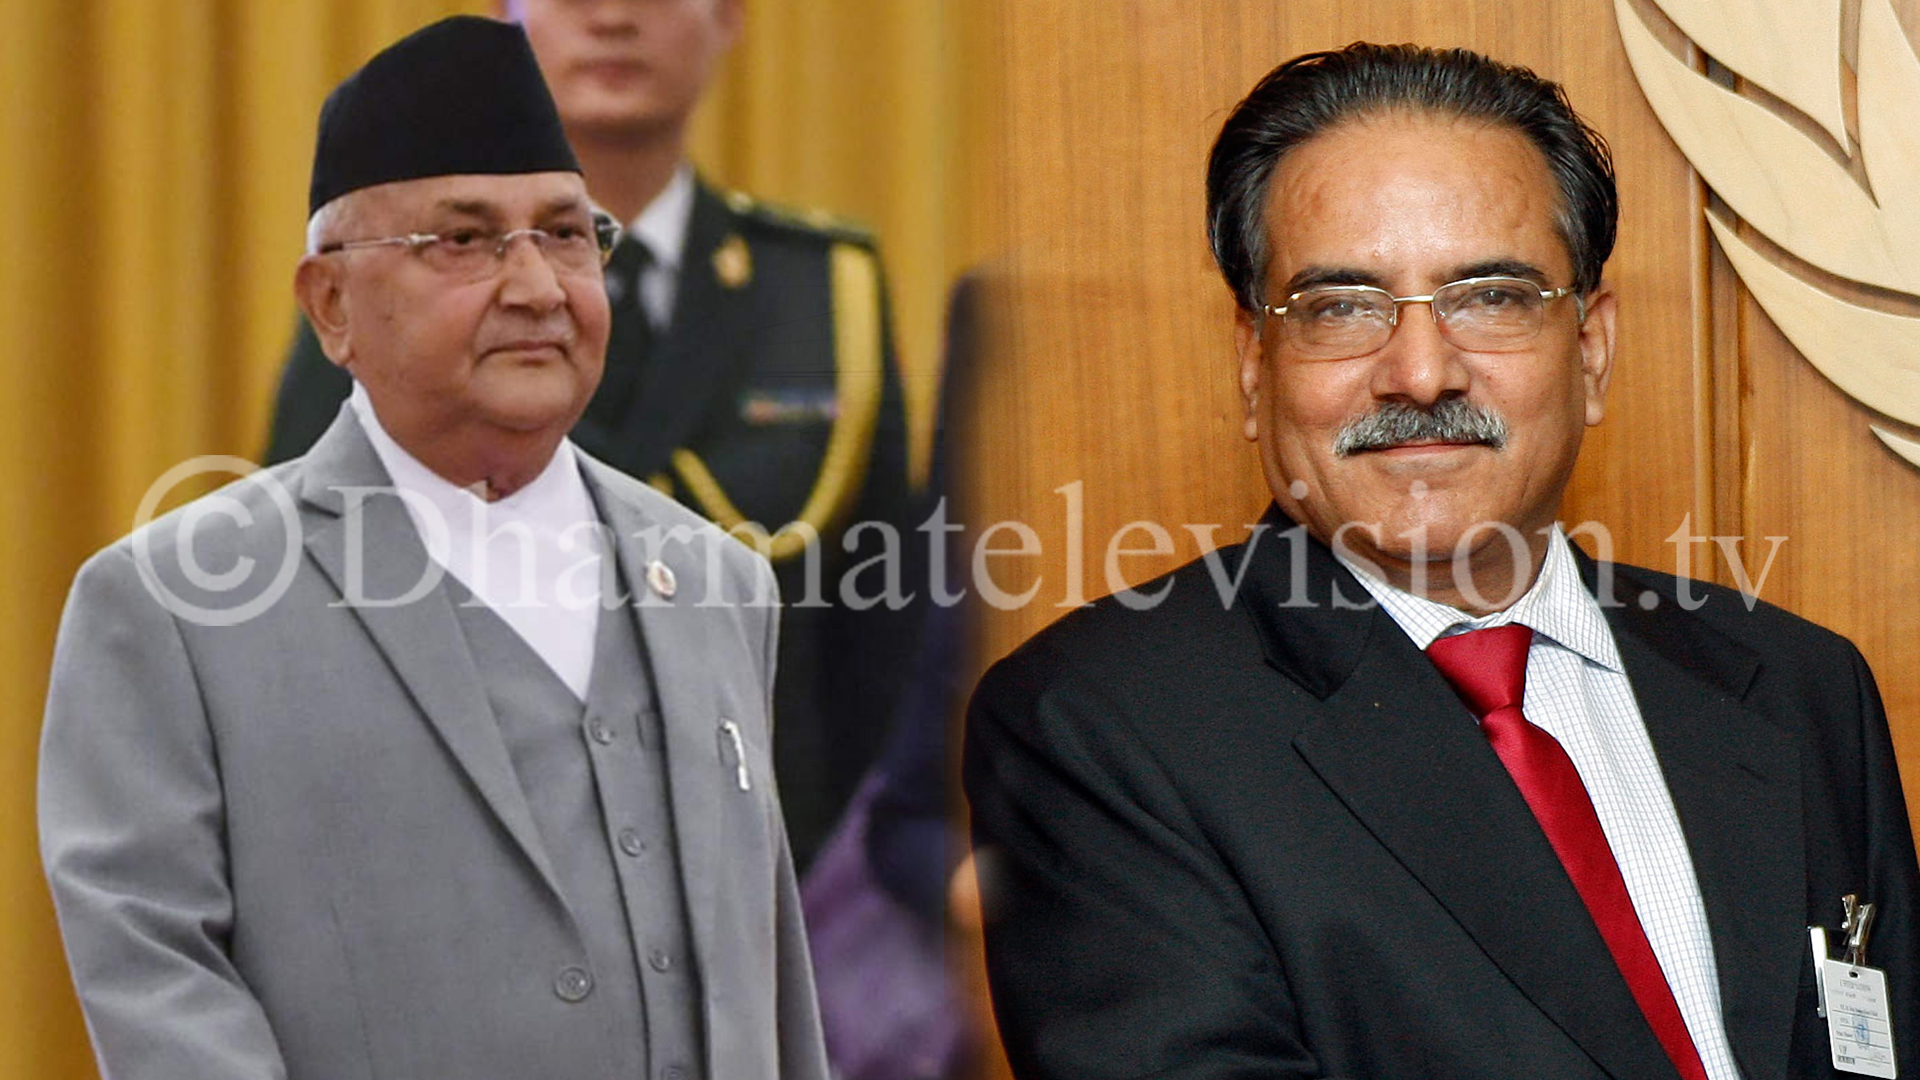 NCP Charman-duo present concrete action plan- Oli to continue as PM full term, Prachanda to focus on party